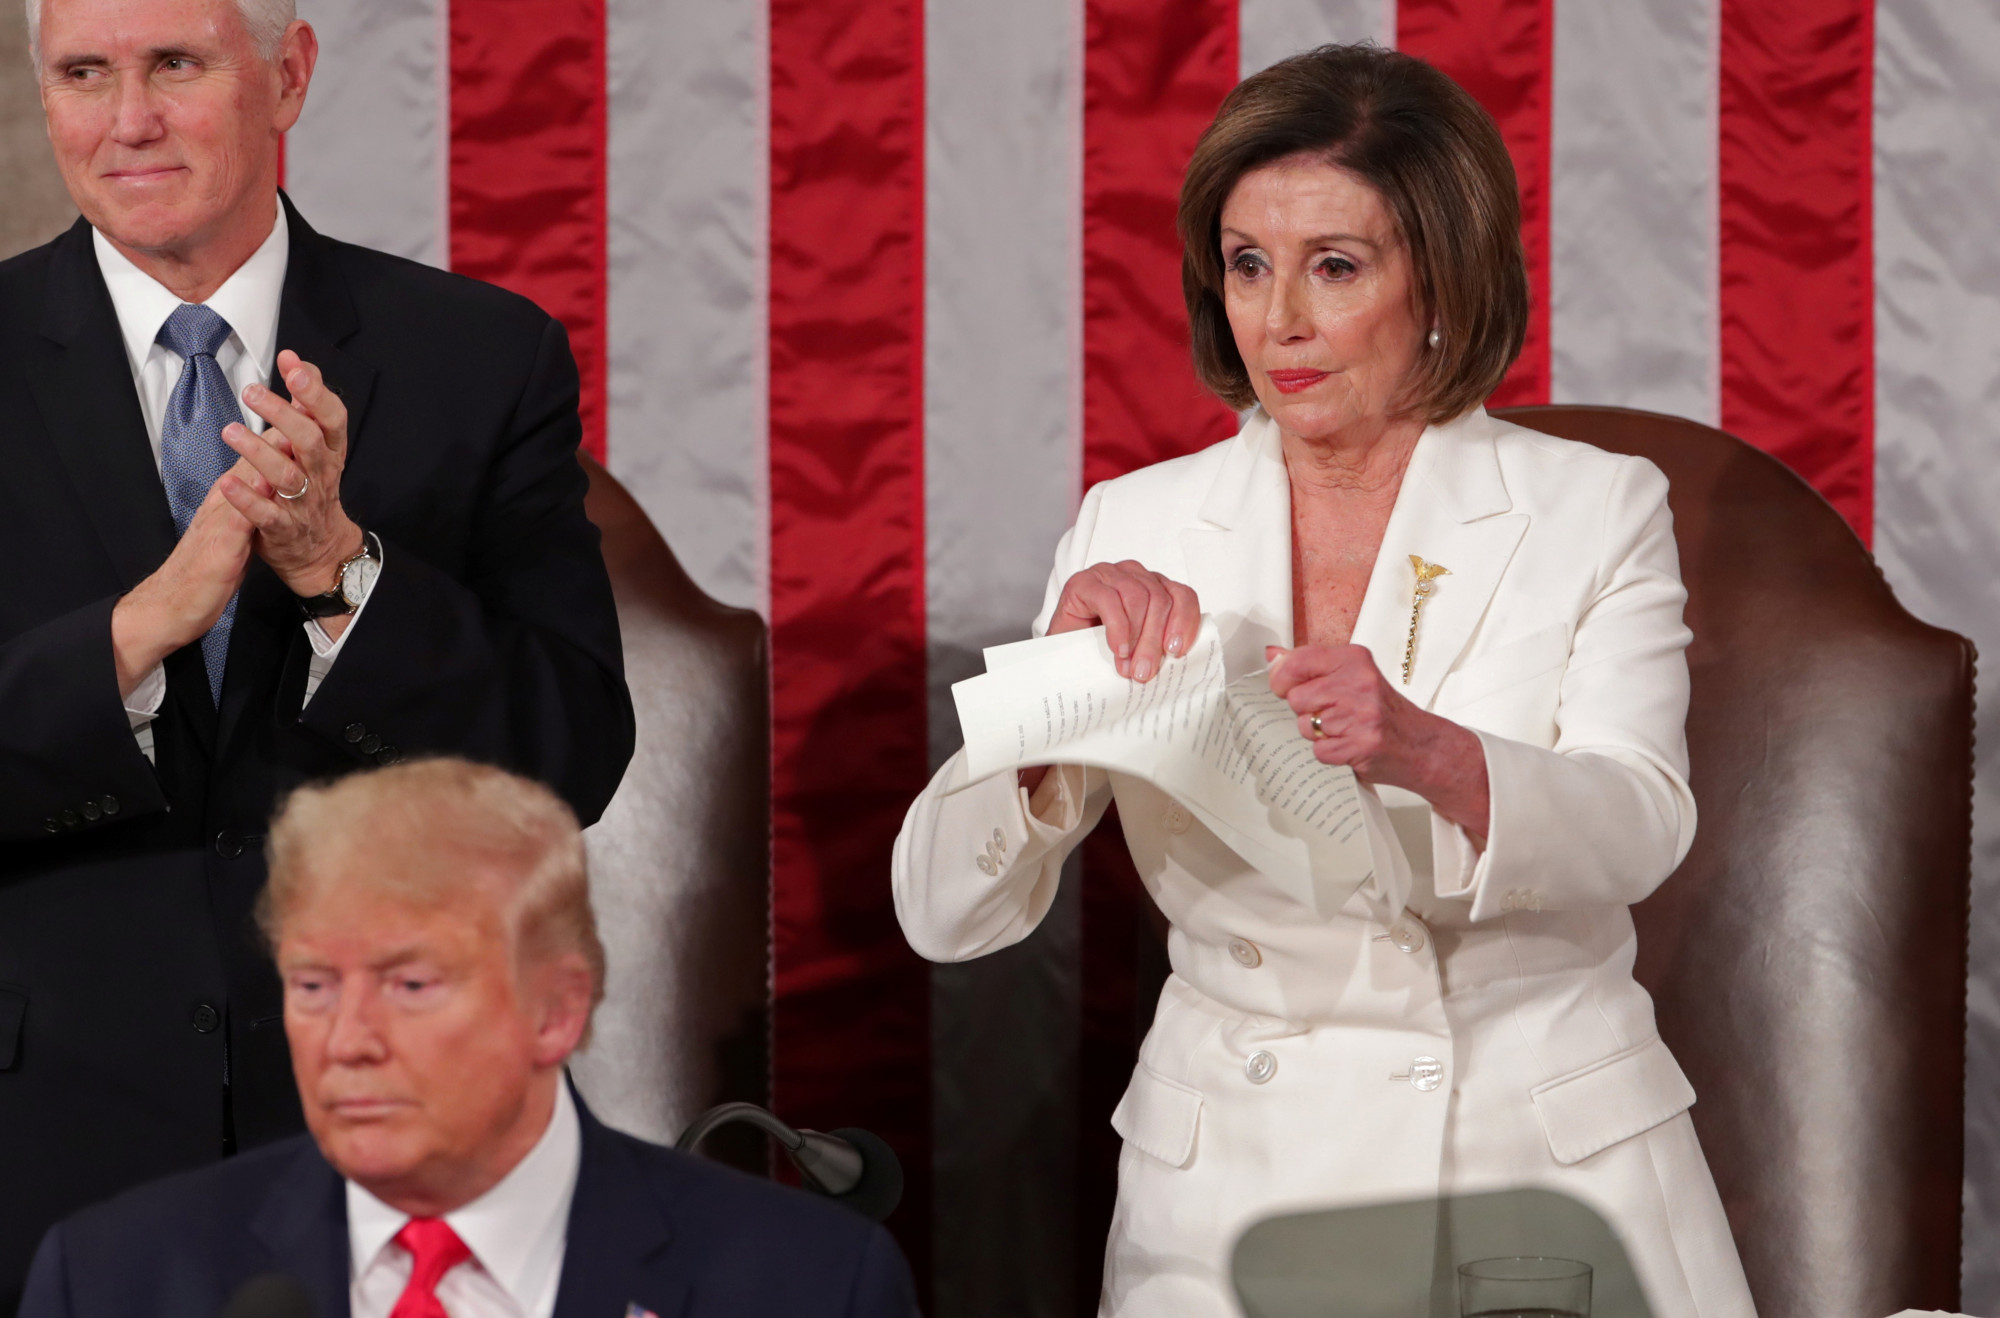 Pelosi Explains Why She Ripped up Trump’s Speech